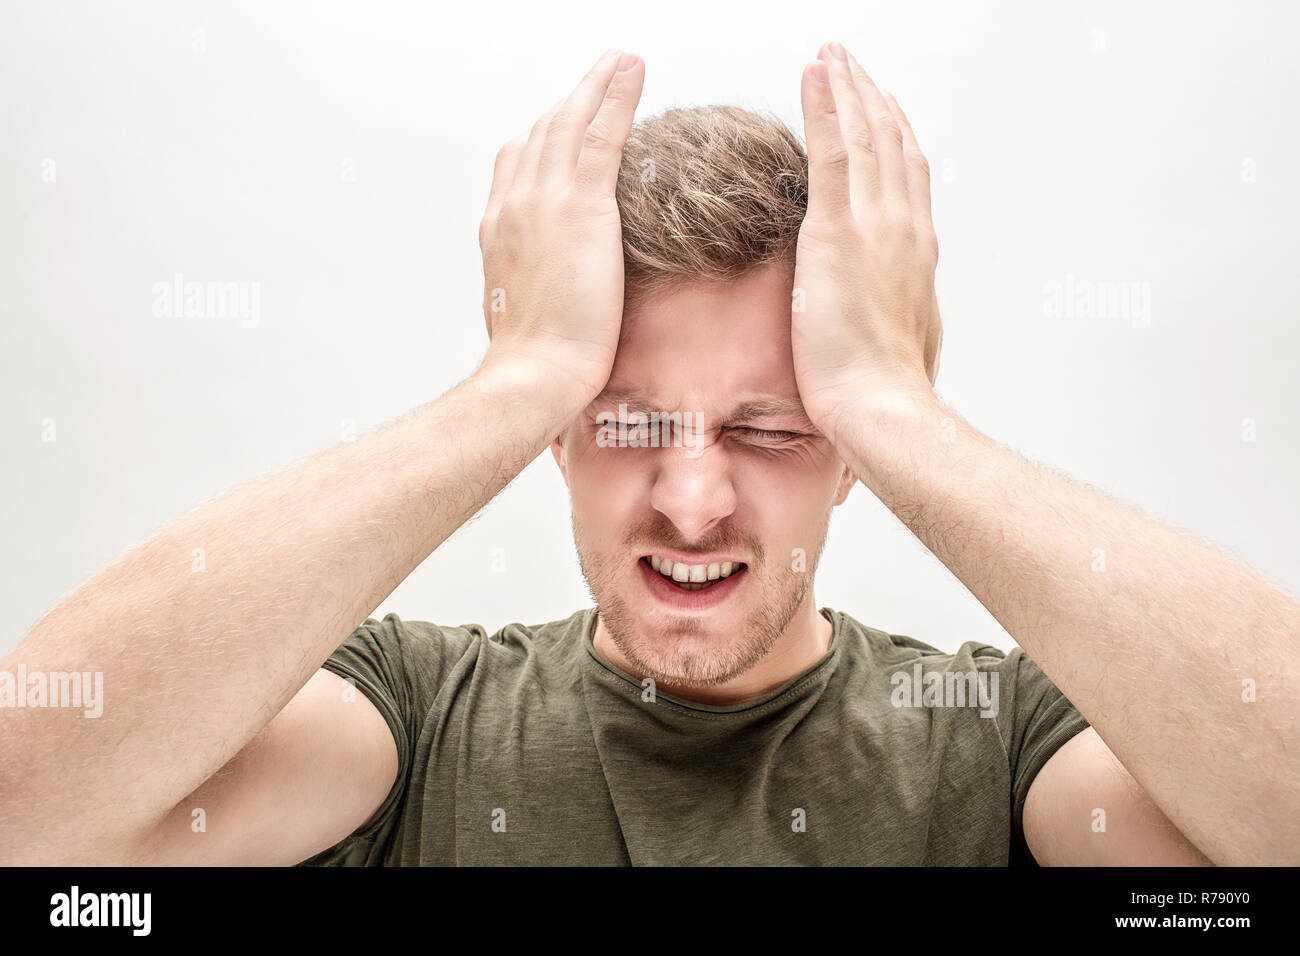 Handsome young man has headache. He suffer. Guy hold hands on forehead. Isolated on white background. Stock Photo